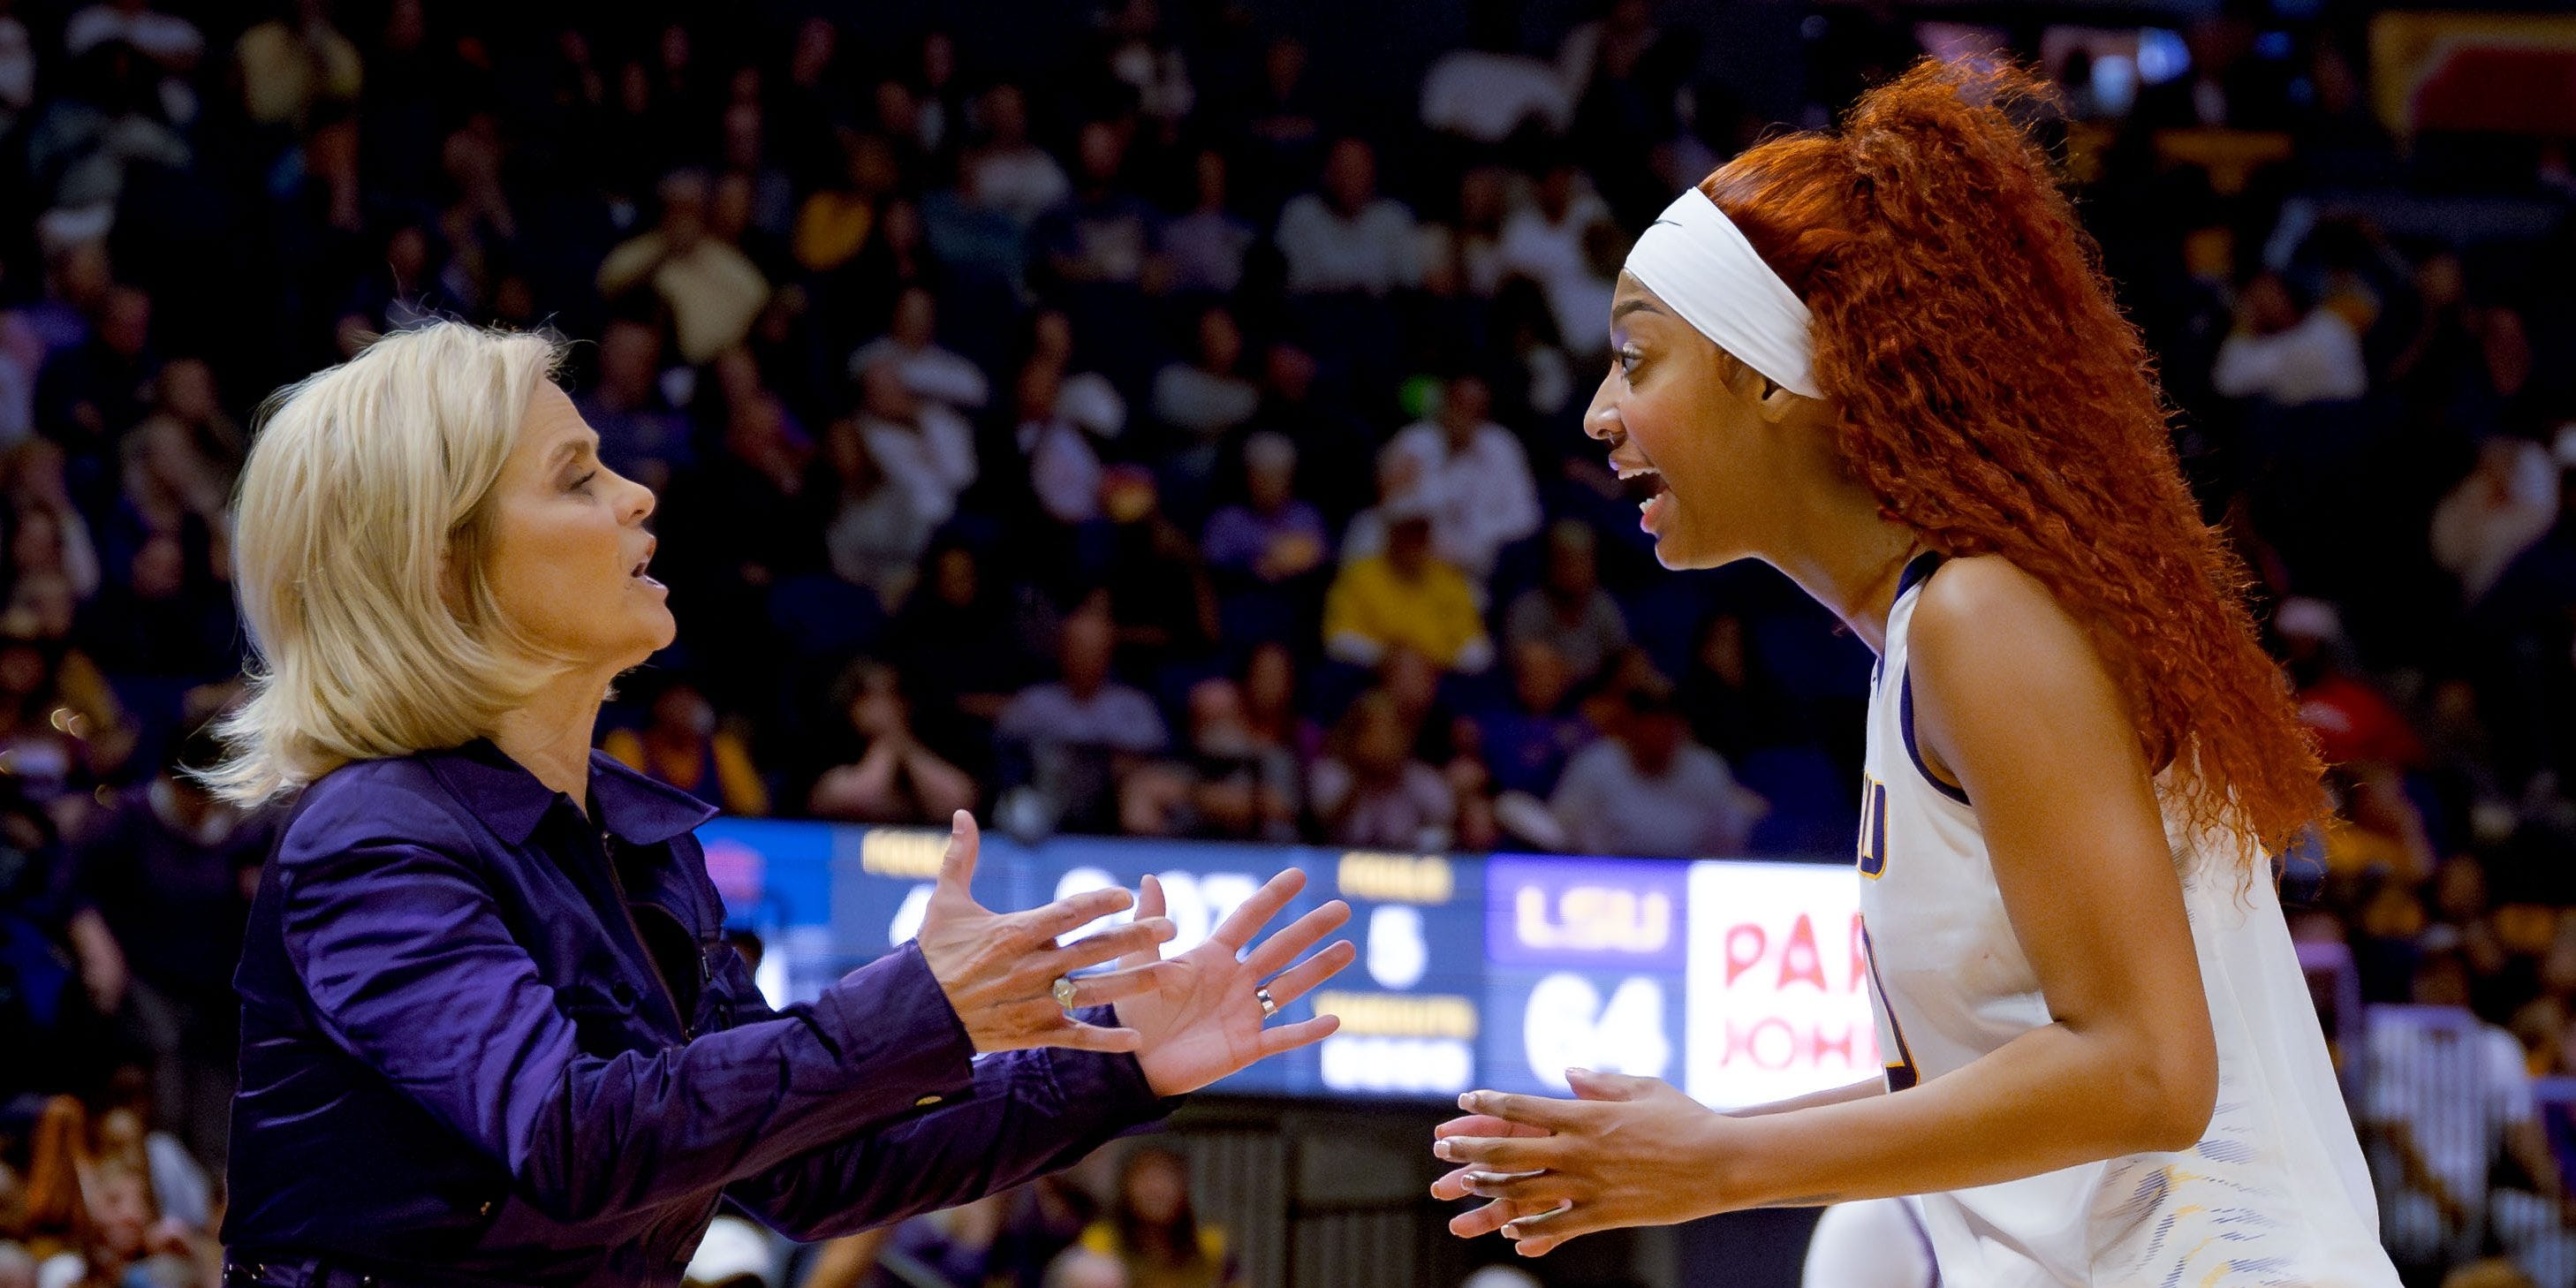 Feb 22, 2024; Baton Rouge, Louisiana, USA; LSU Lady Tigers head coach Kim Mulkey, left, and LSU Lady Tigers forward Angel Reese talk during the second half against the Auburn Tigers at Pete Maravich Assembly Center. Mandatory Credit: Matthew Hinton-USA TODAY Sports ORG XMIT: IMAGN-731529 ORIG FILE ID: 20240222_cec_ft8_345.JPG